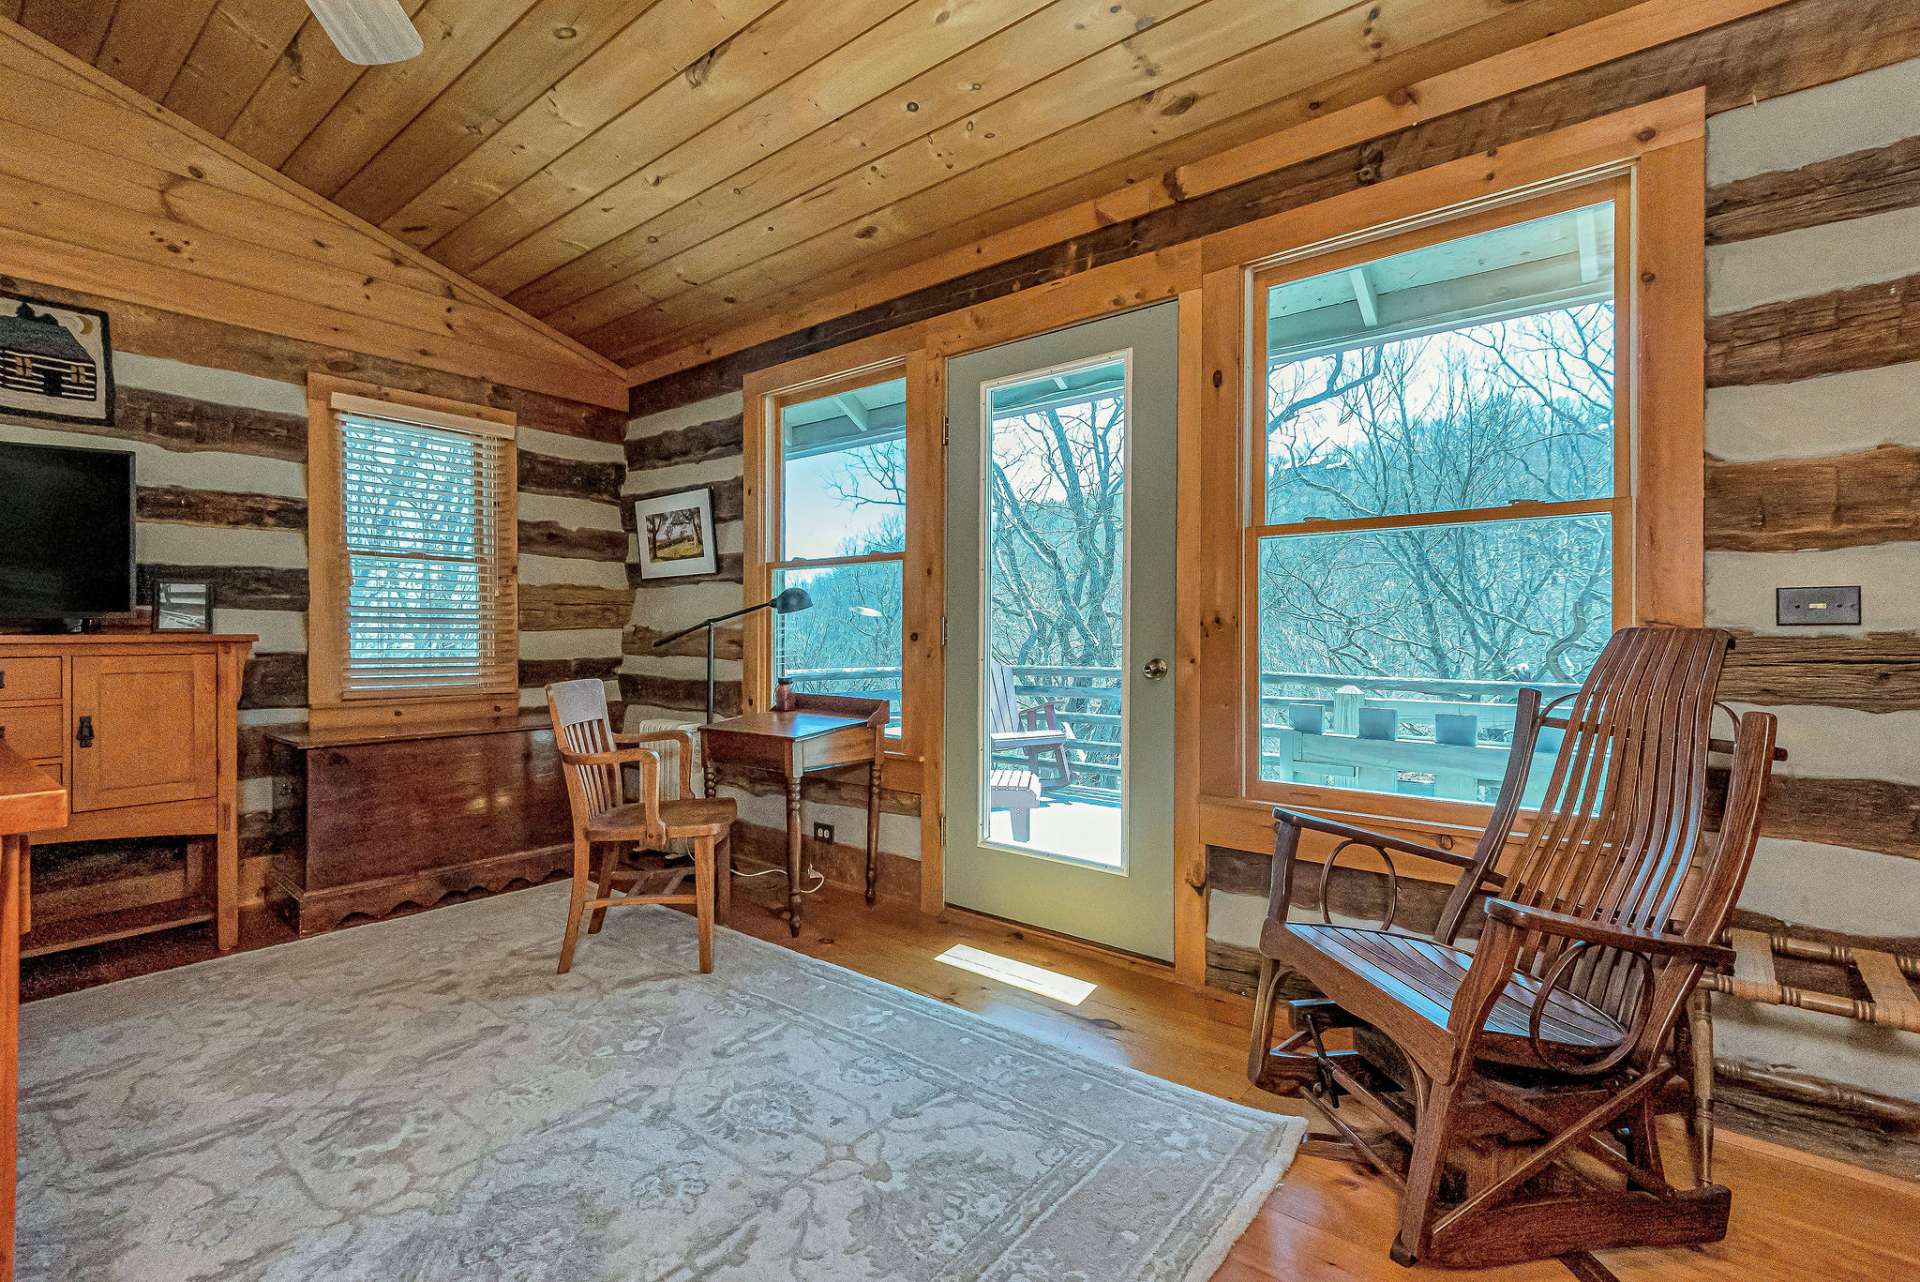 The door and abundant windows allow natural light to flood the room to get your day started. Convenient deck access allows one to enjoy mountain top living and the starry nights of the open sky.